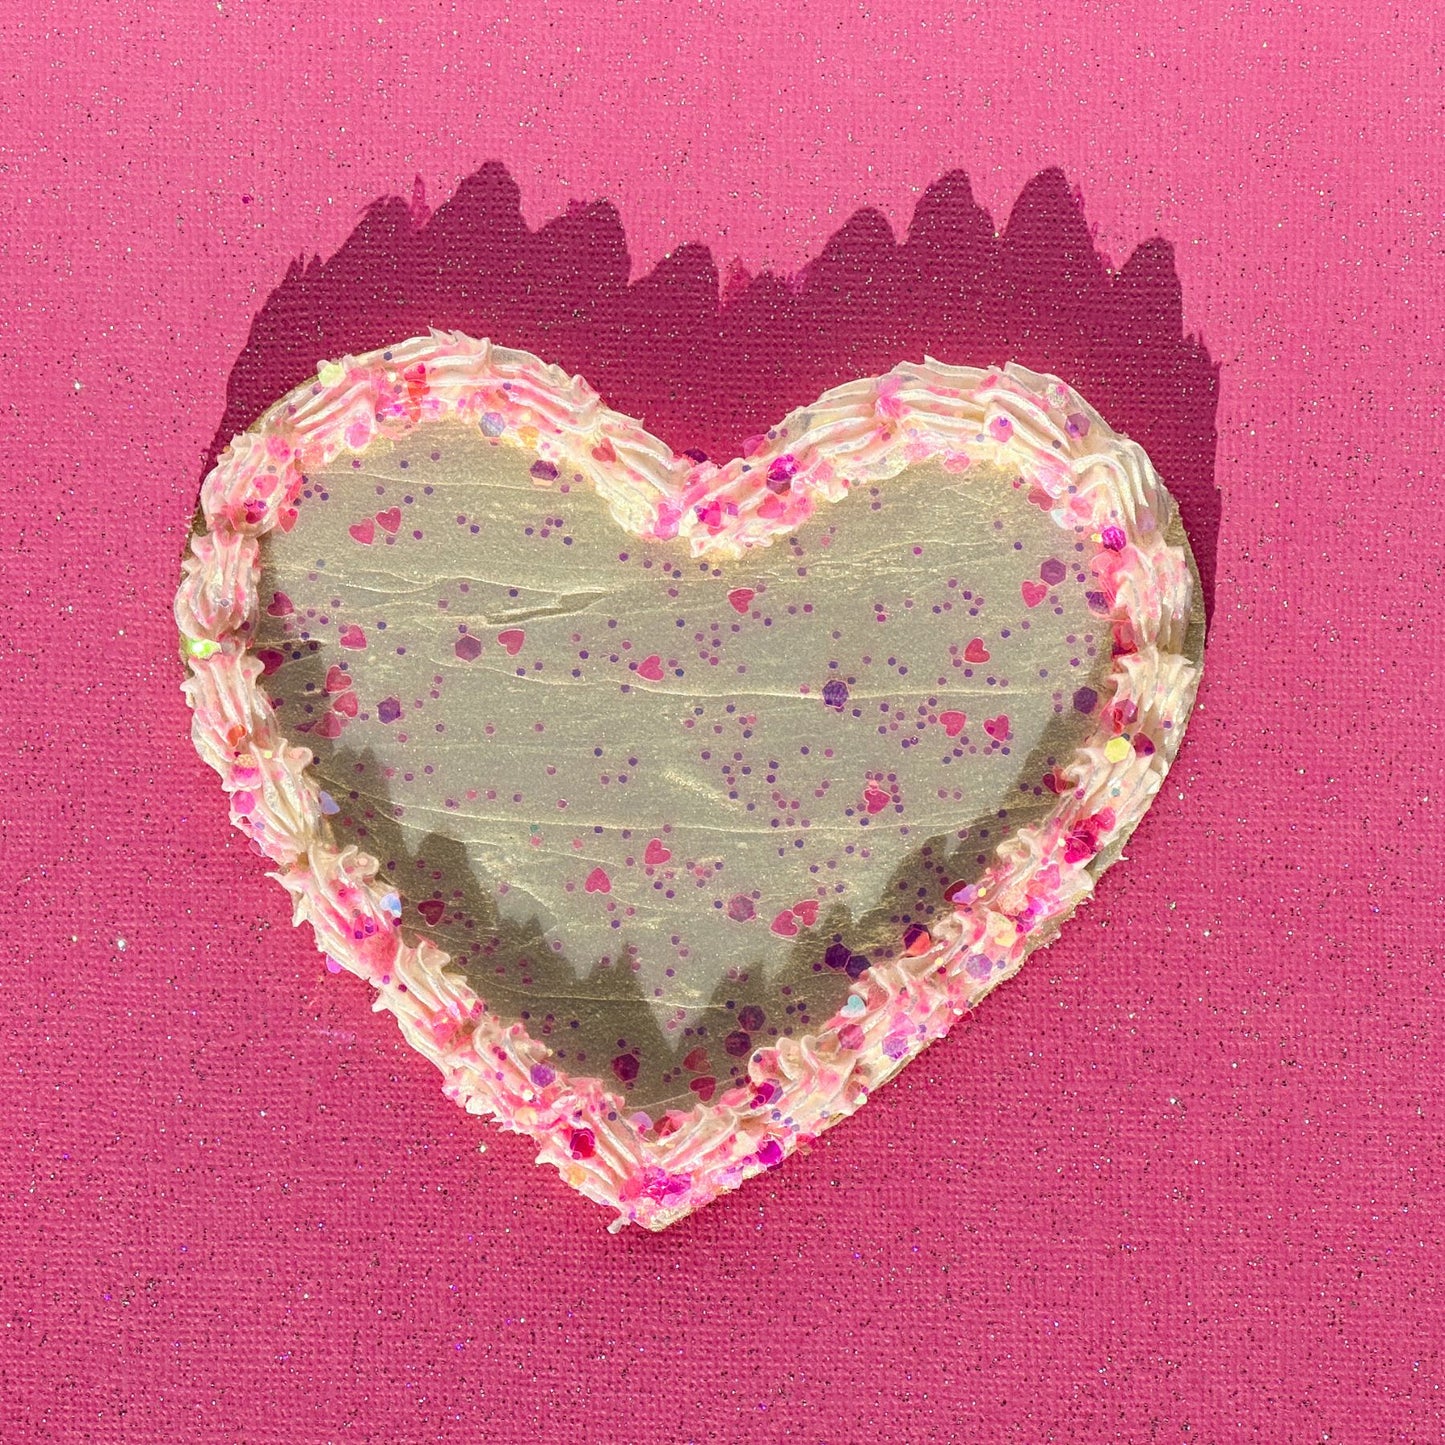 3D Painted Cookie - Heart  With Pearl "Frosting" and Pink Glitter